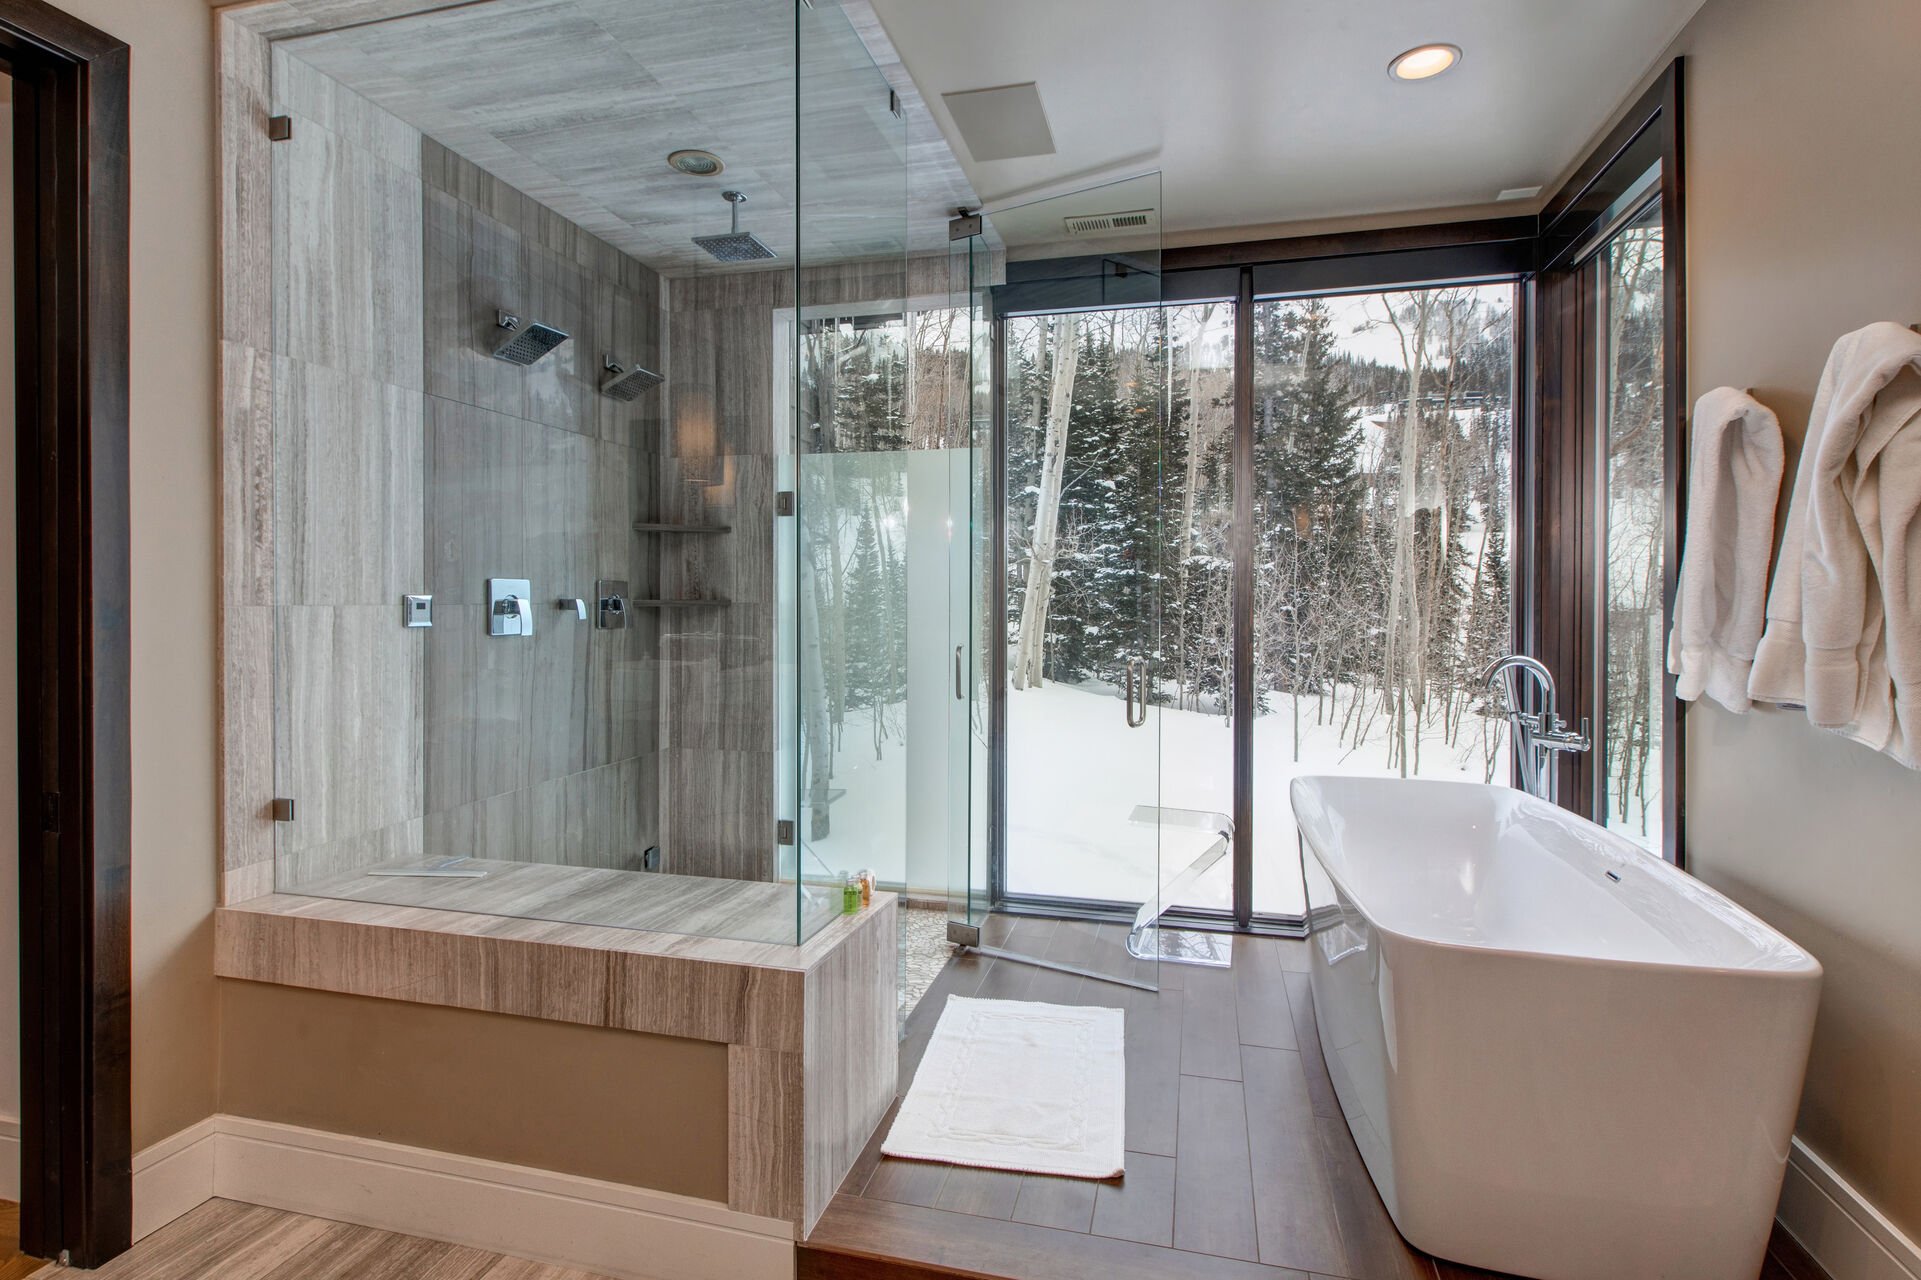 Tub and Shower with Mountain and Wooded Views